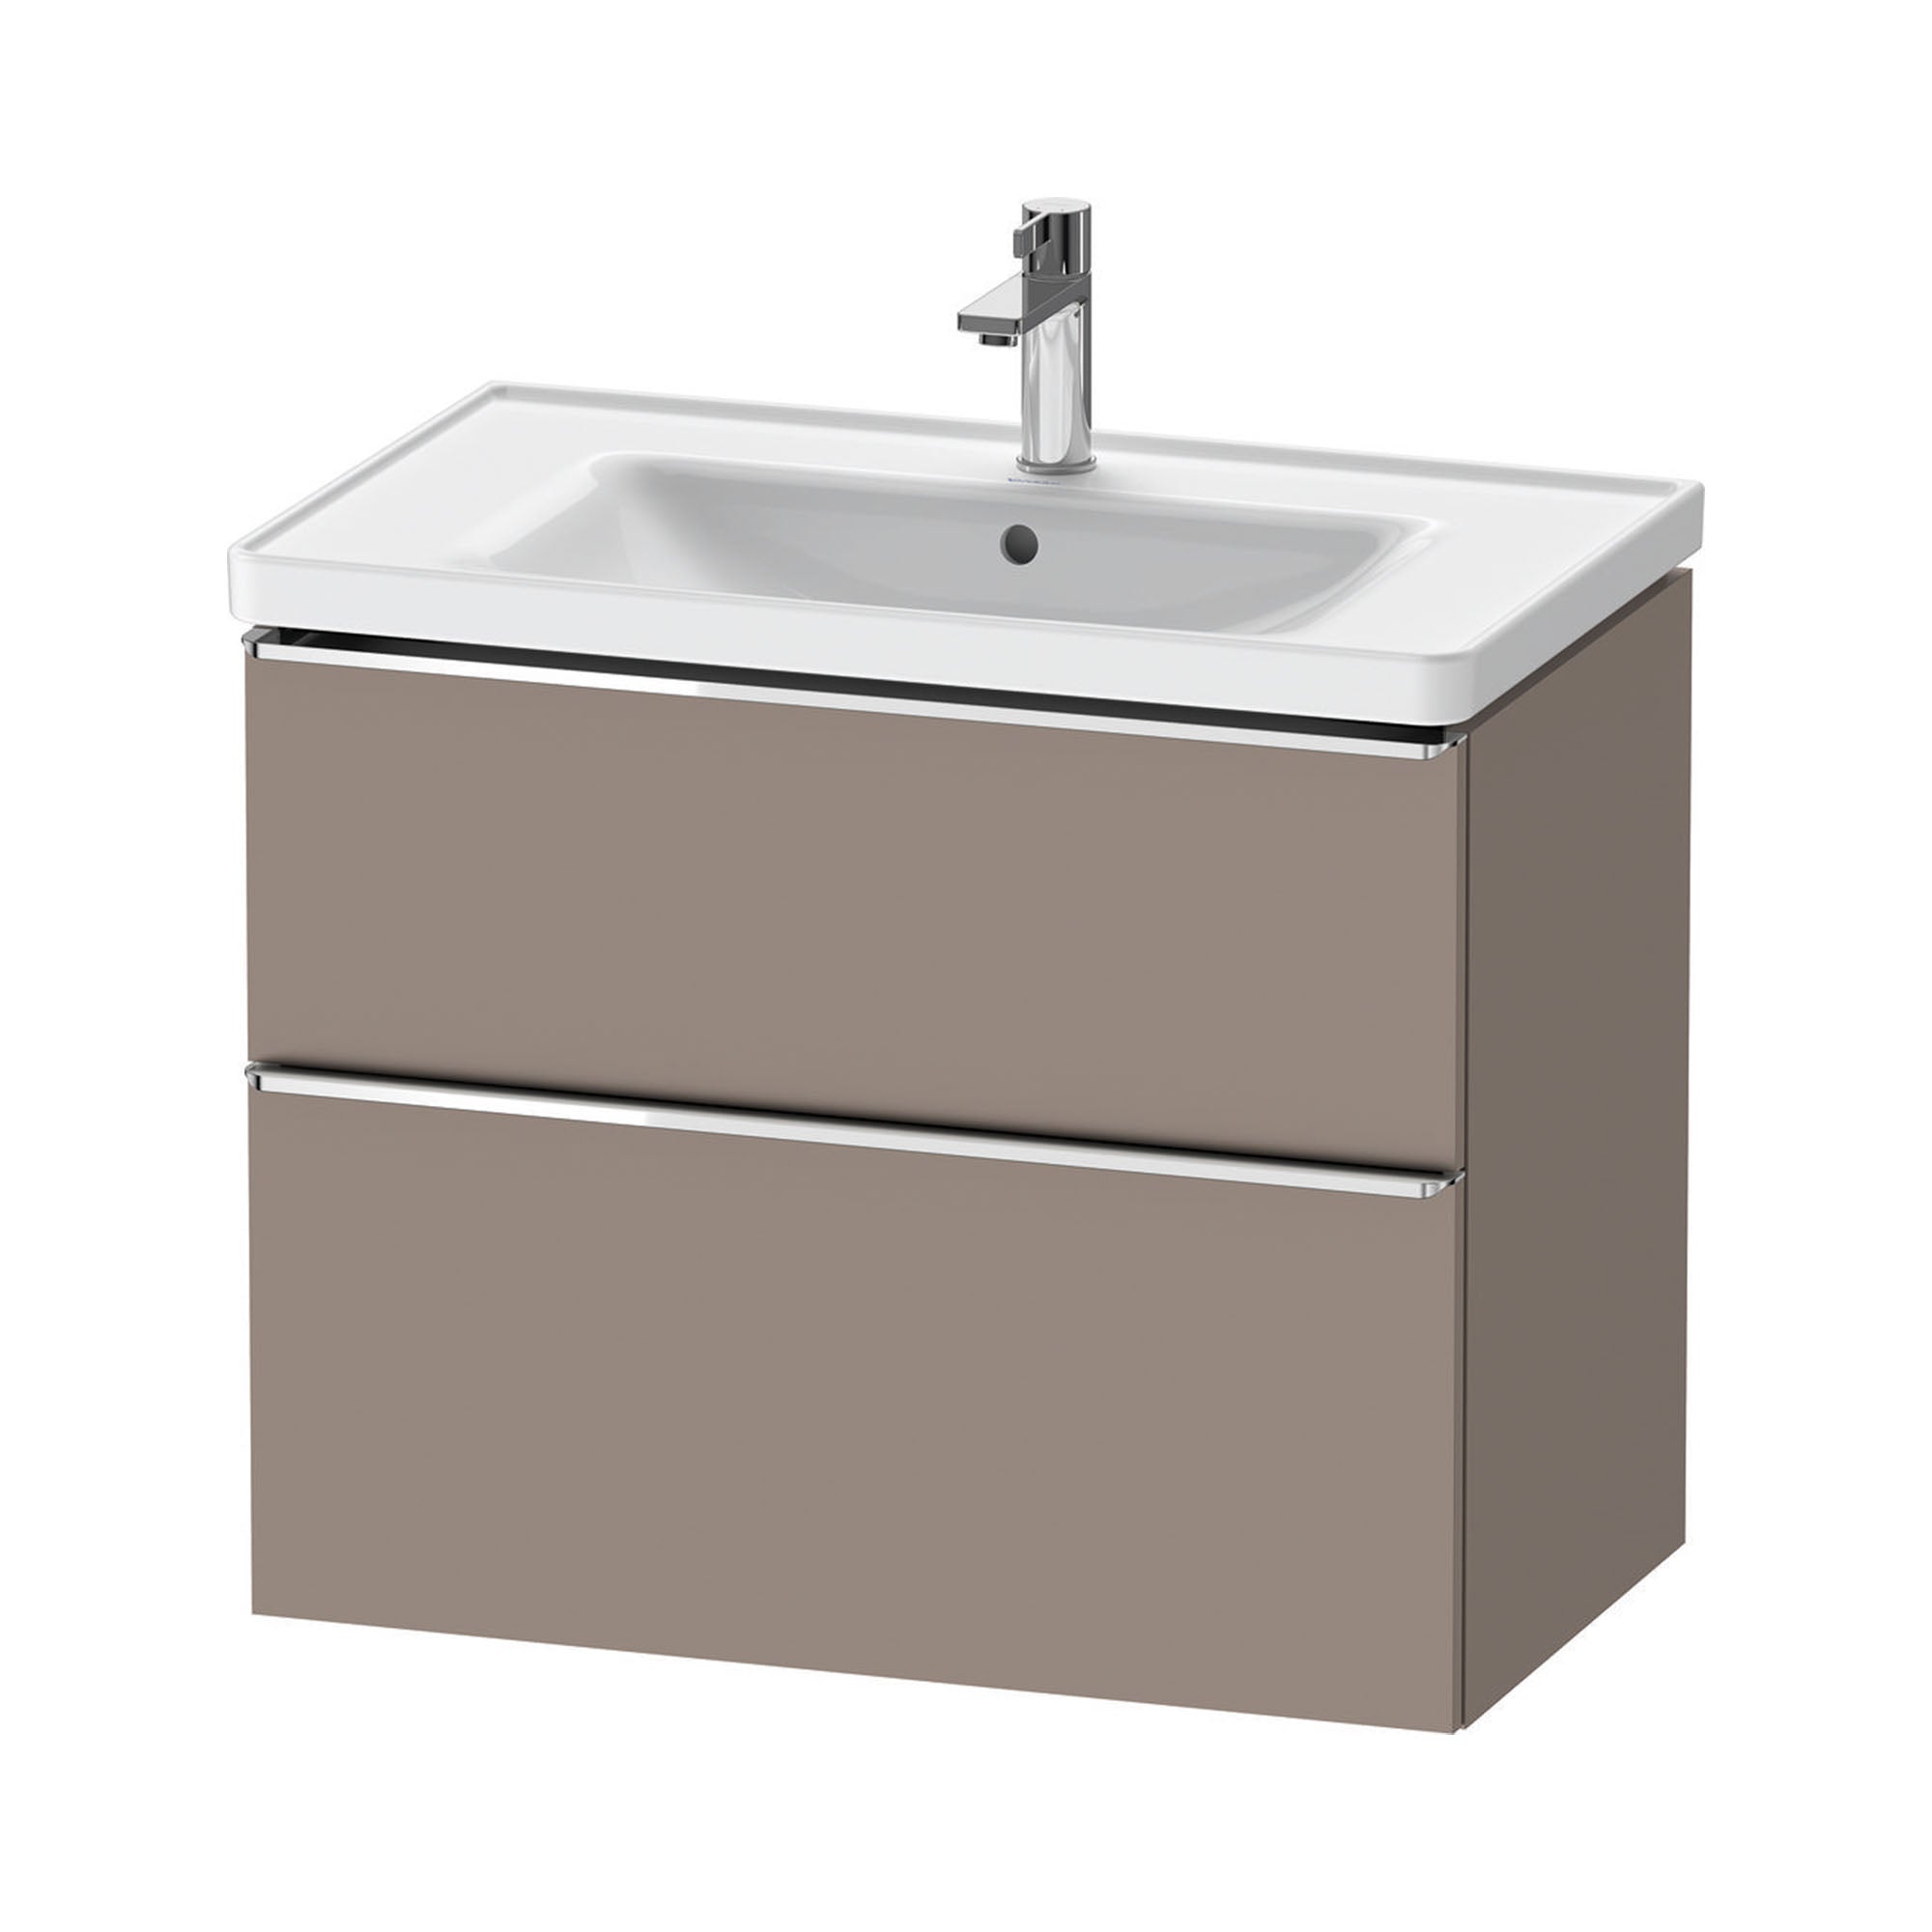 duravit d-neo 800mm wall mounted vanity unit with d-neo basin basalt chrome handles